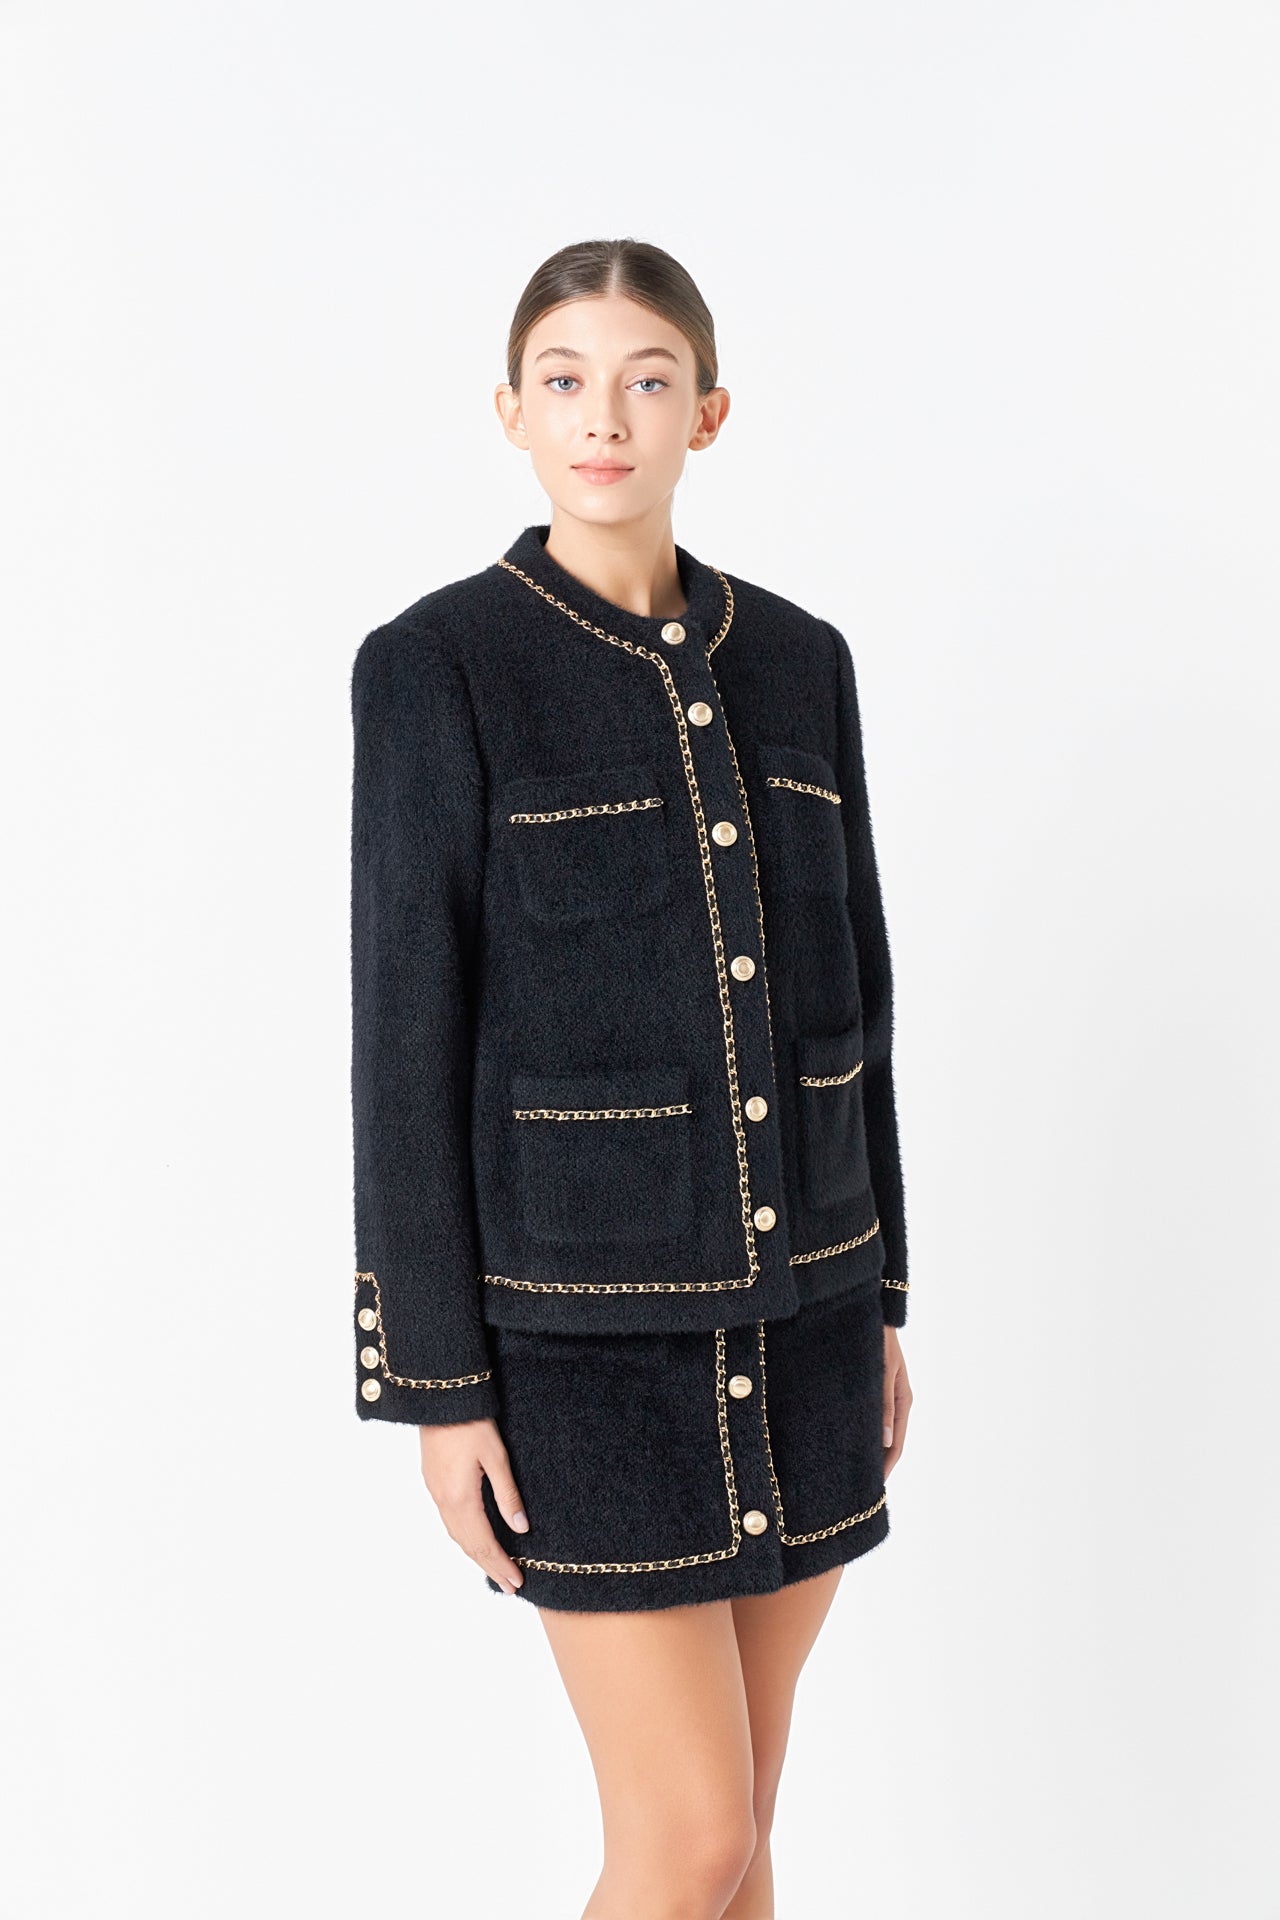 ENDLESS ROSE - Chain Trimmed Jacket - JACKETS available at Objectrare